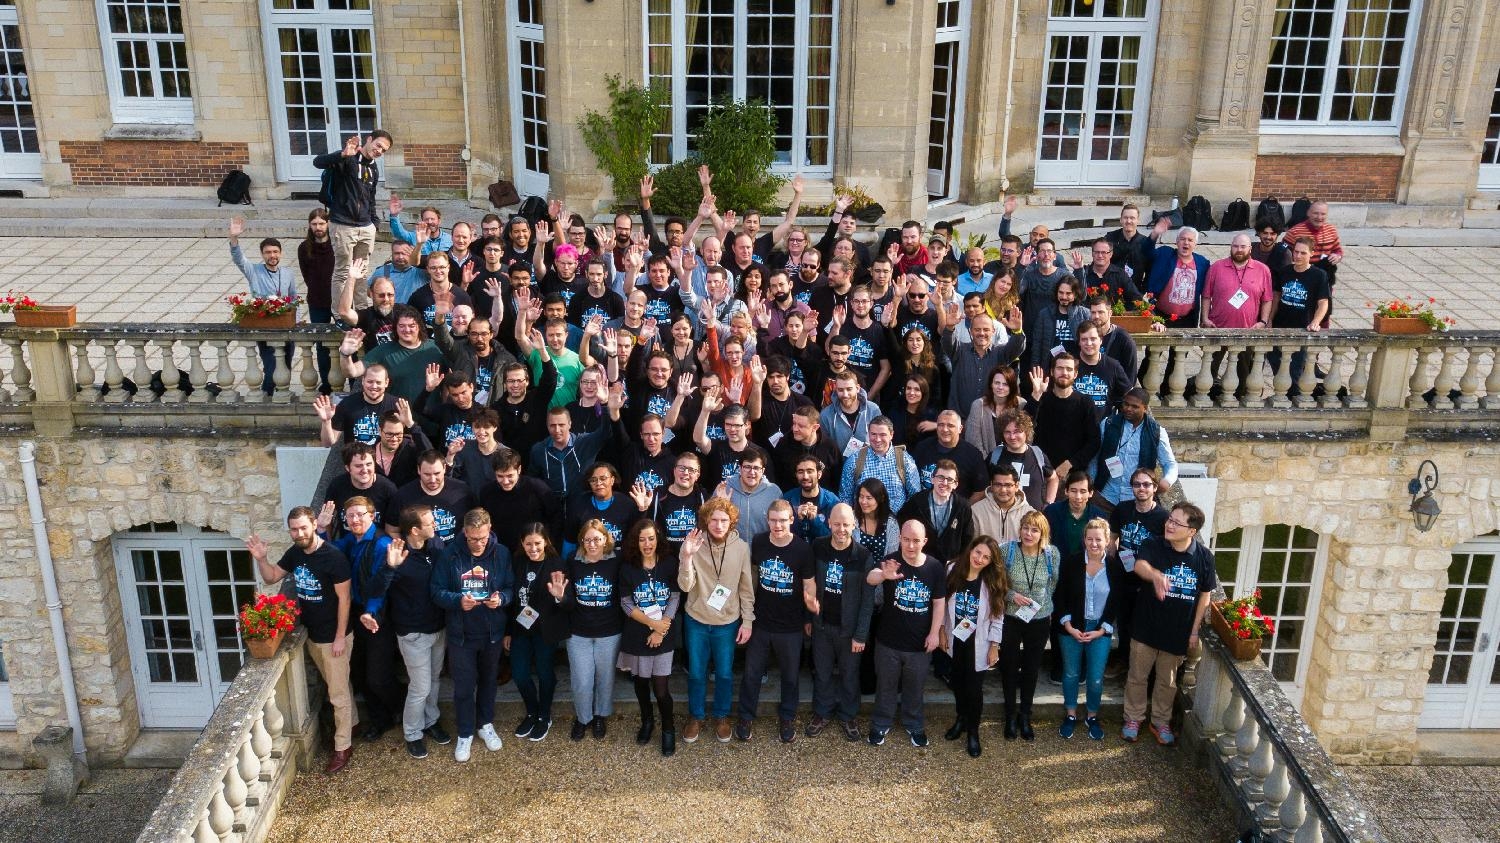 Team members from 97 cities and 25+ countries gather together in France for our annual retreat. 